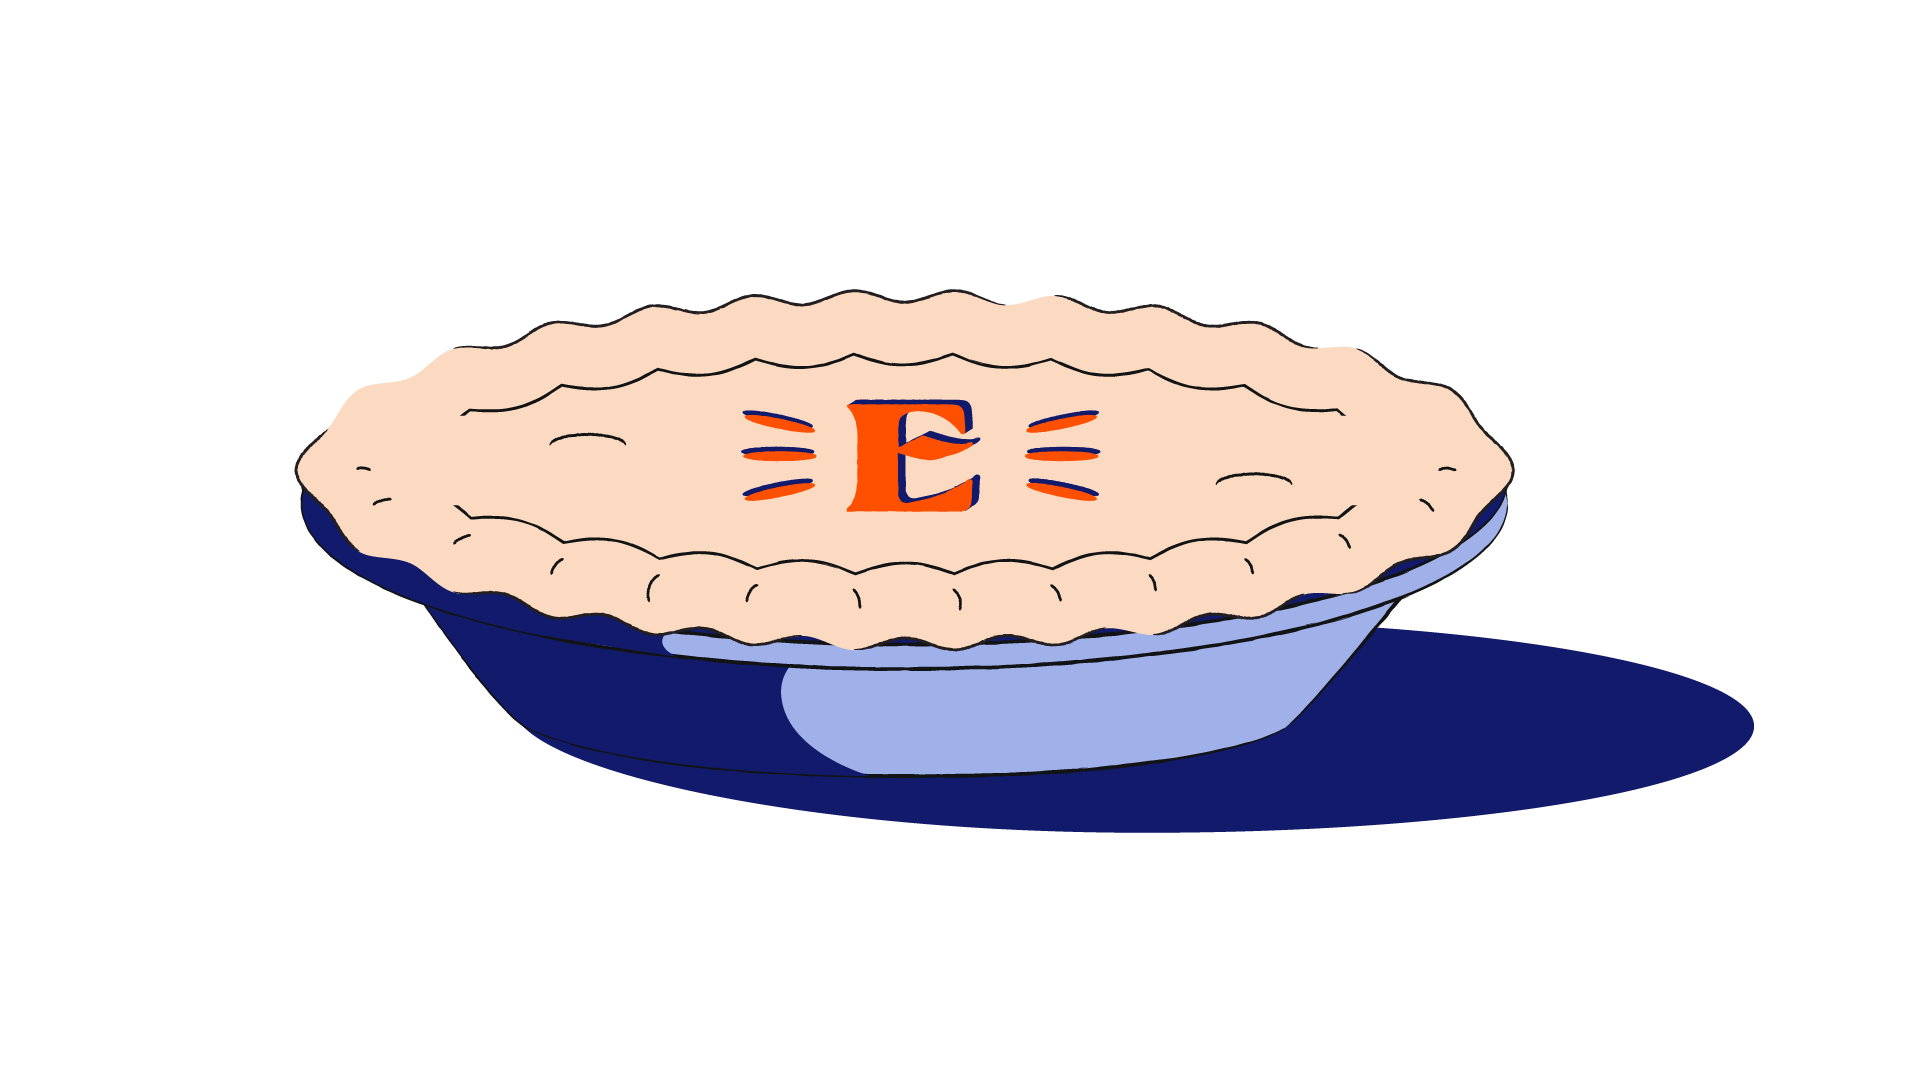 Pie with an Everly "E" baked into the middle